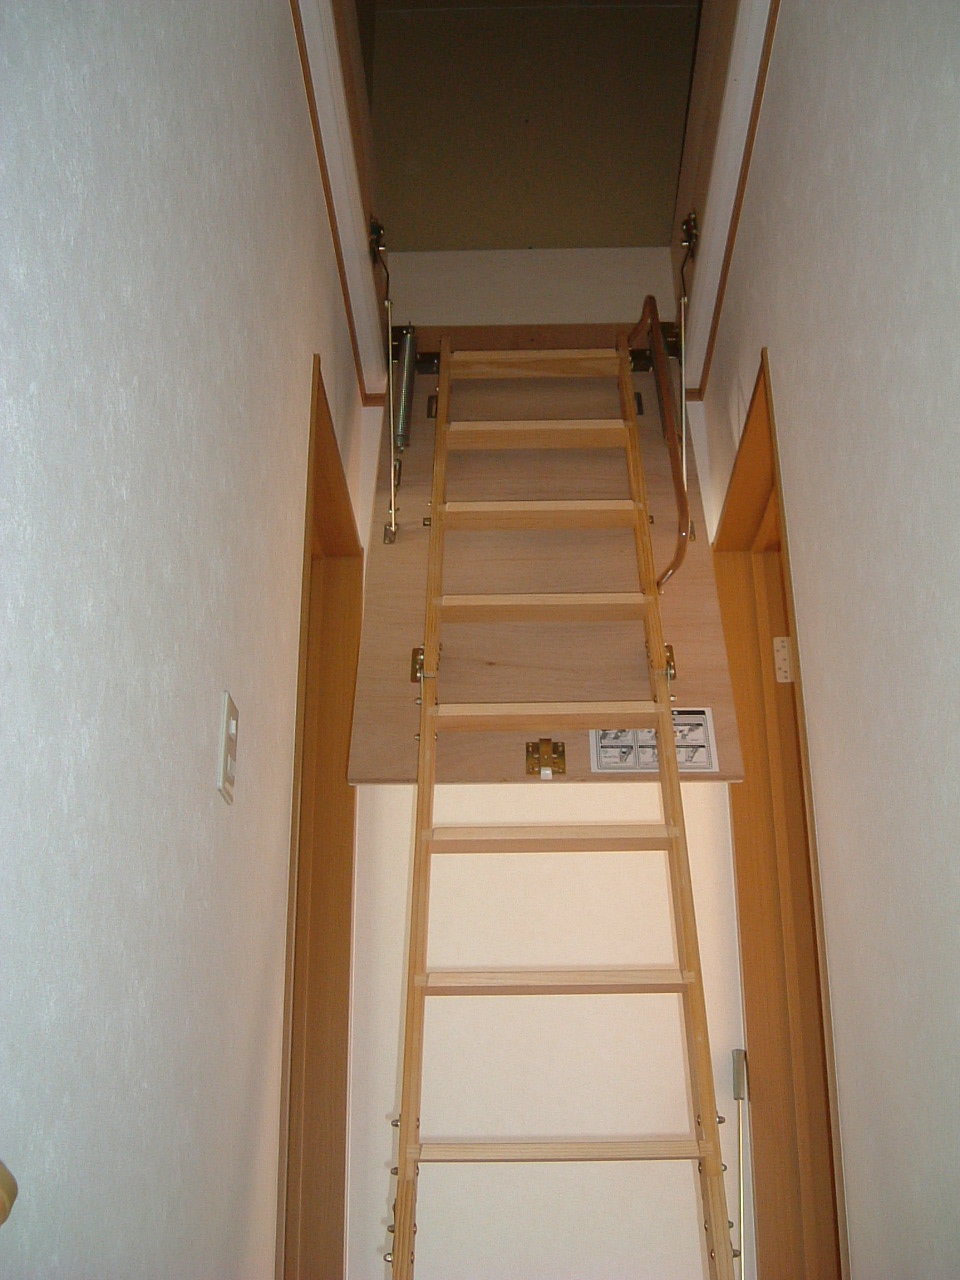 Other Equipment. Stairs to the attic storage